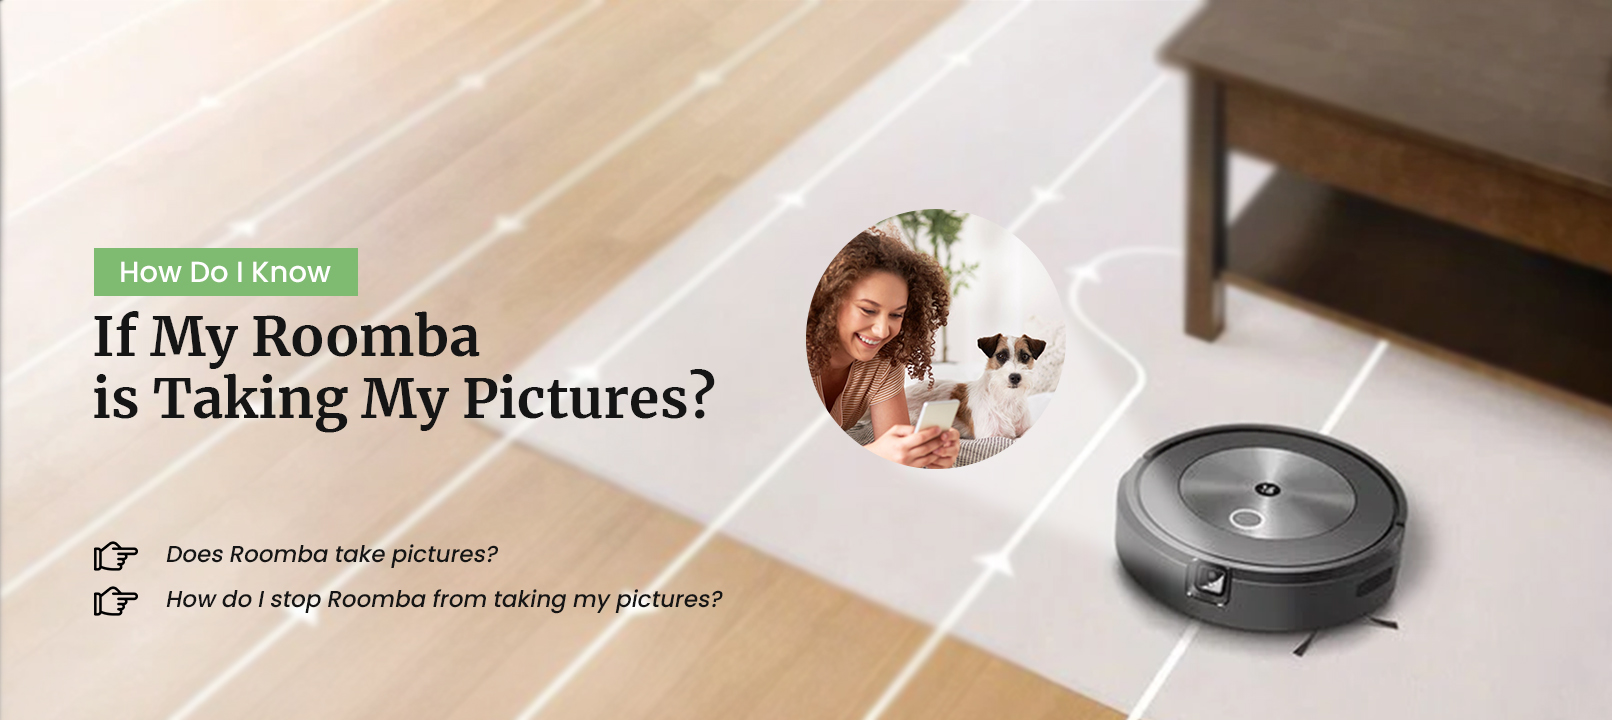 How Do I Know if My Roomba is Taking My Pictures